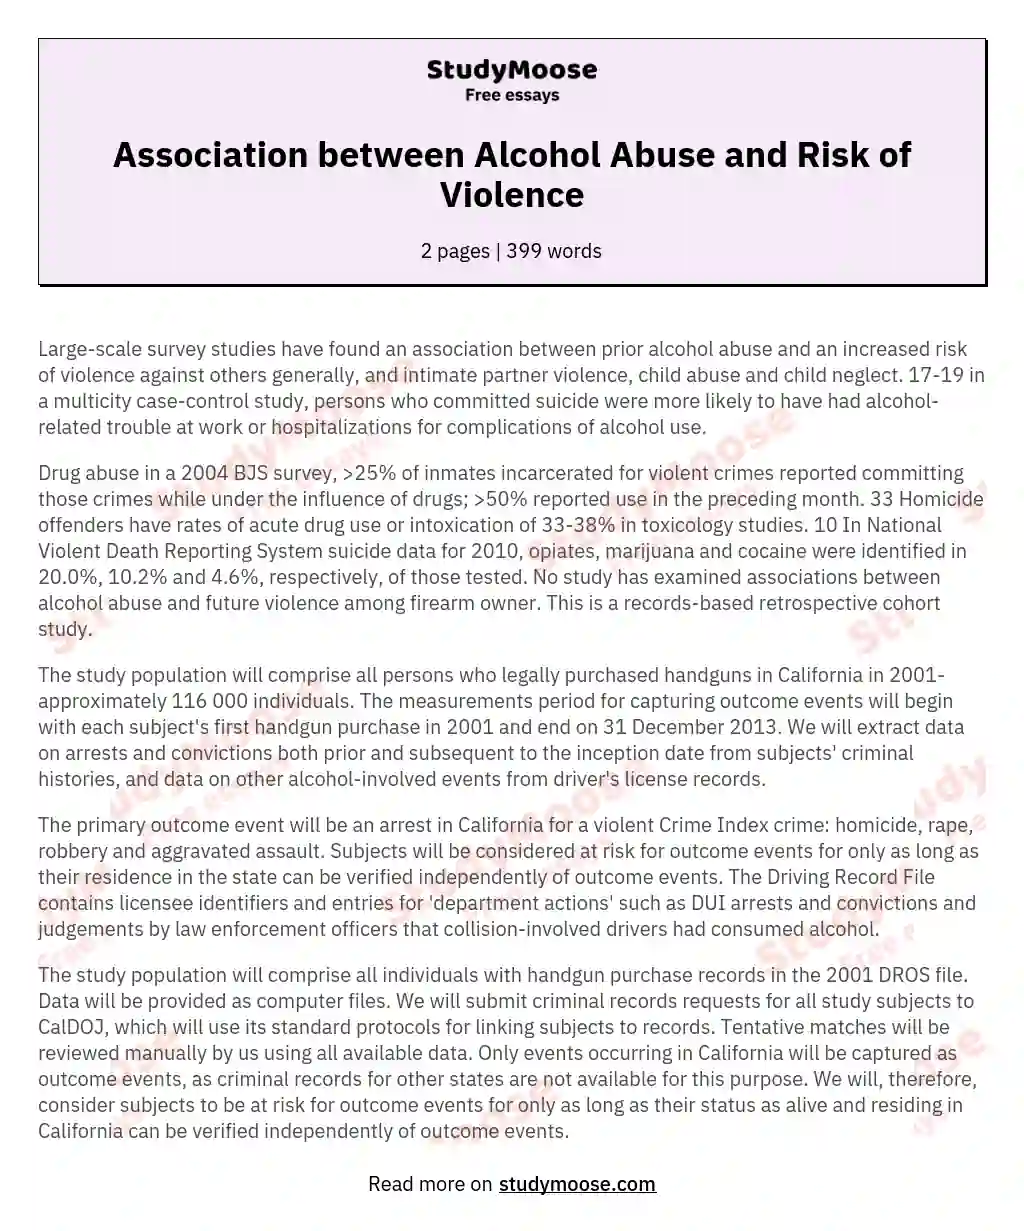 Association between Alcohol Abuse and Risk of Violence